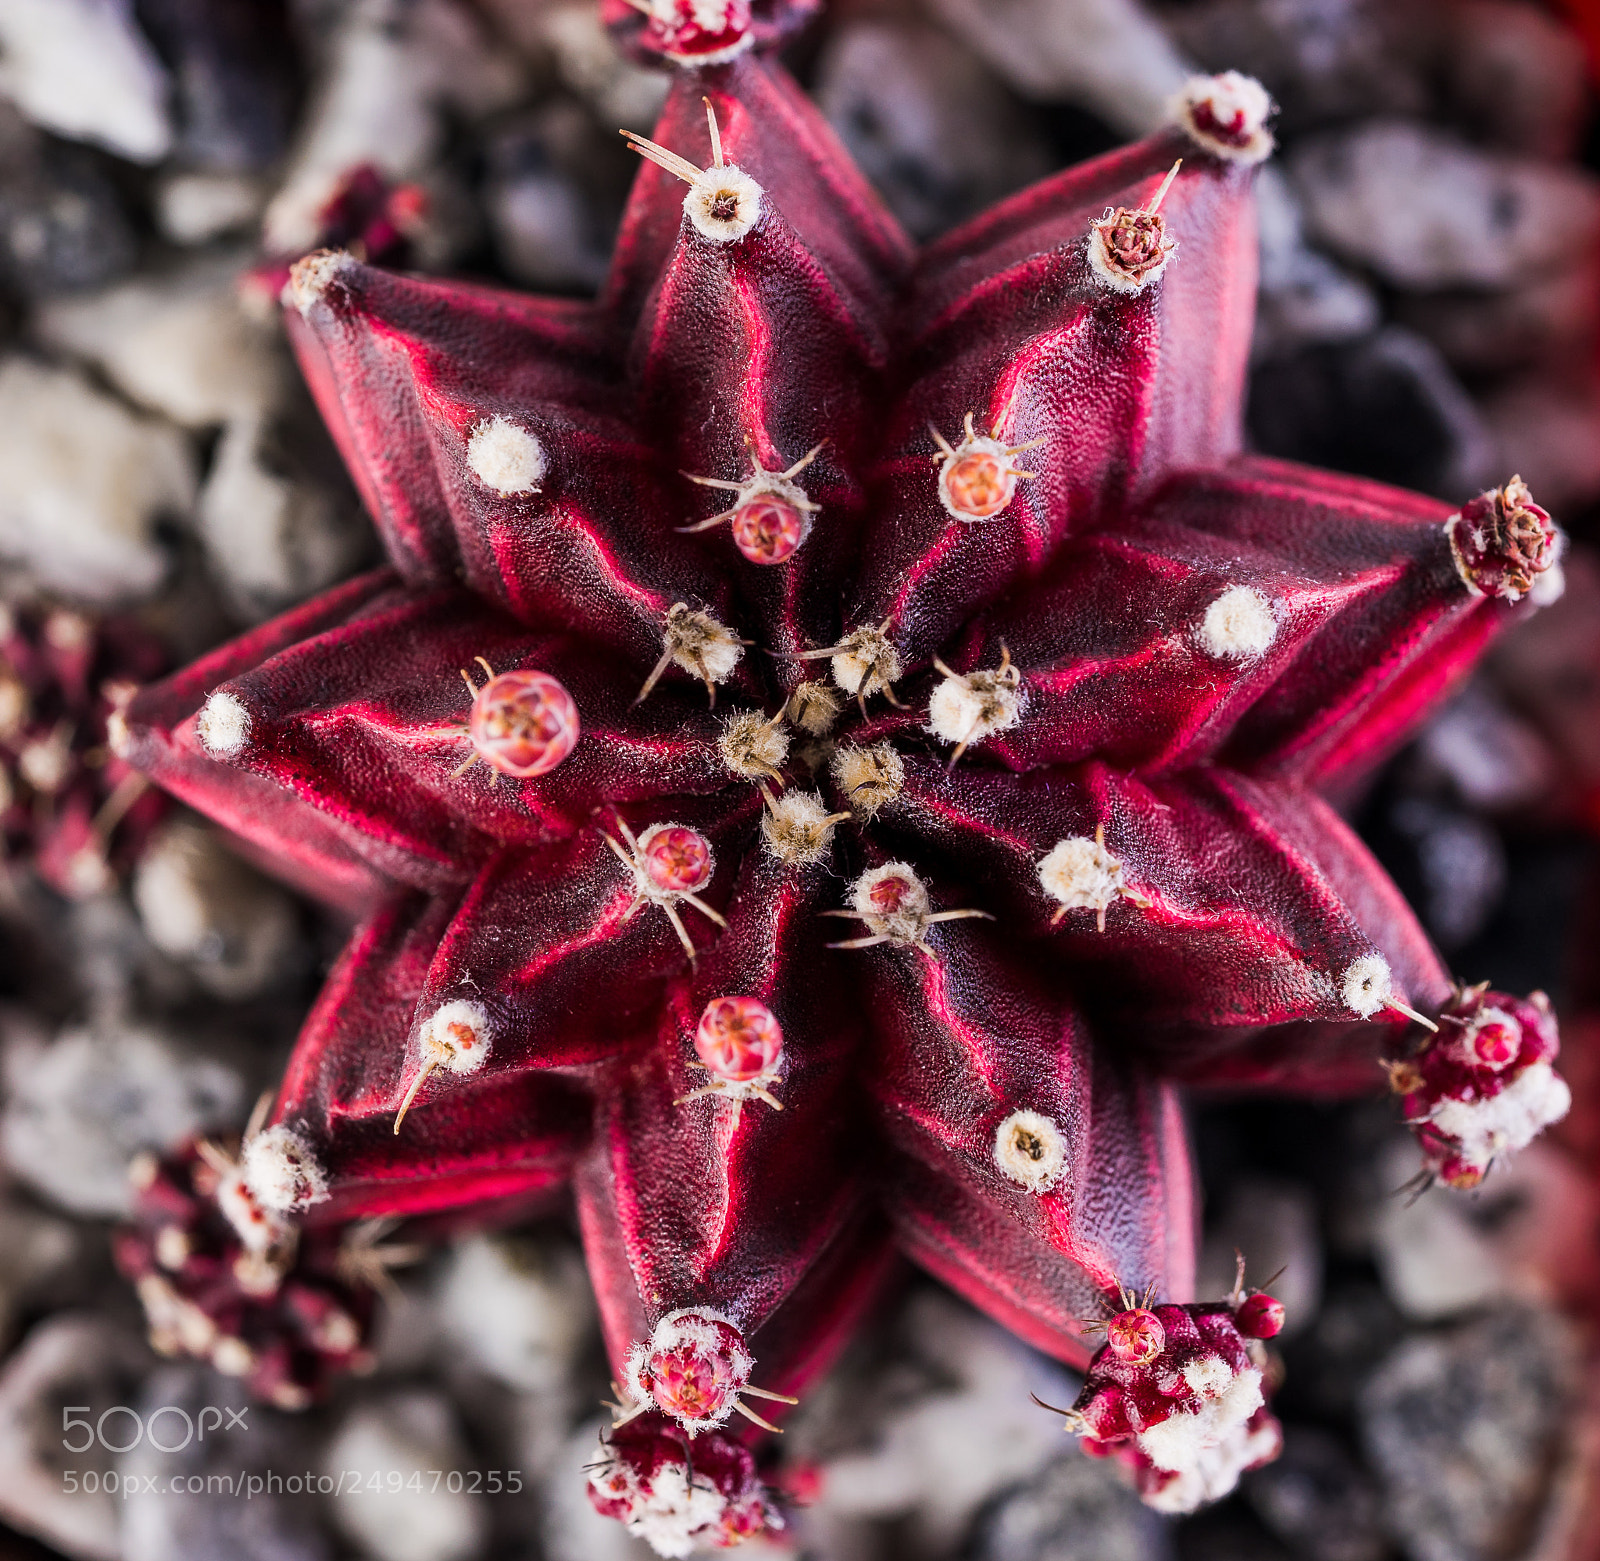 Sony a7 II sample photo. Red star cactus photography